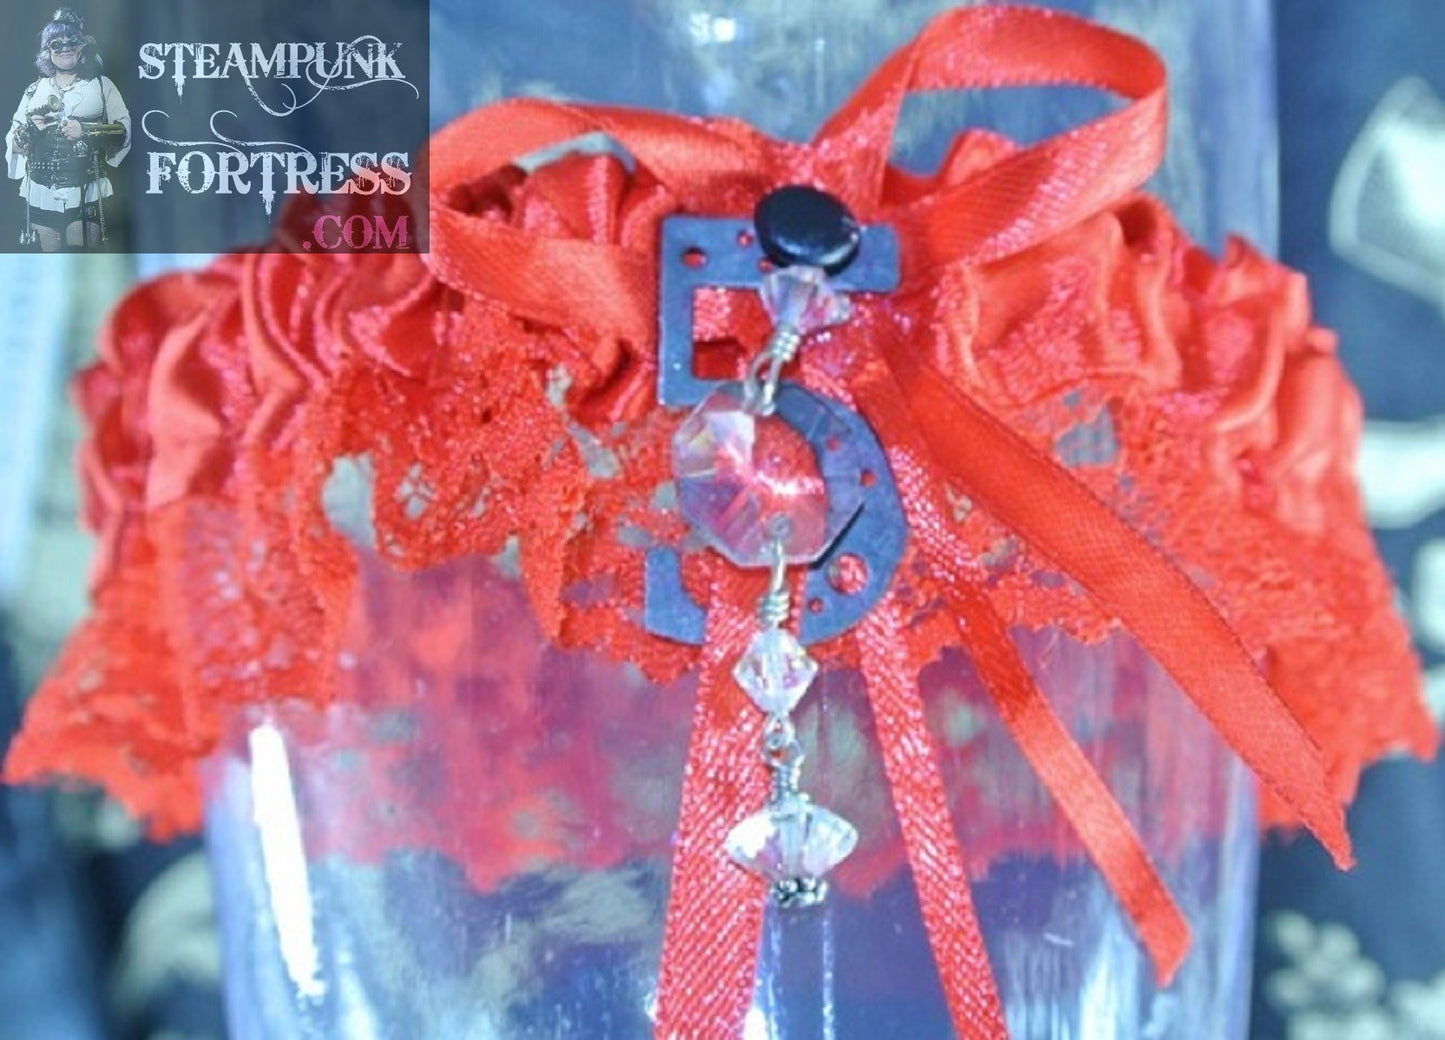 RED BLACK 5 CLEAR CRYSTALS DROP RED LACE GARTER WEDDING STARR WILDE STEAMPUNK FORTRESS